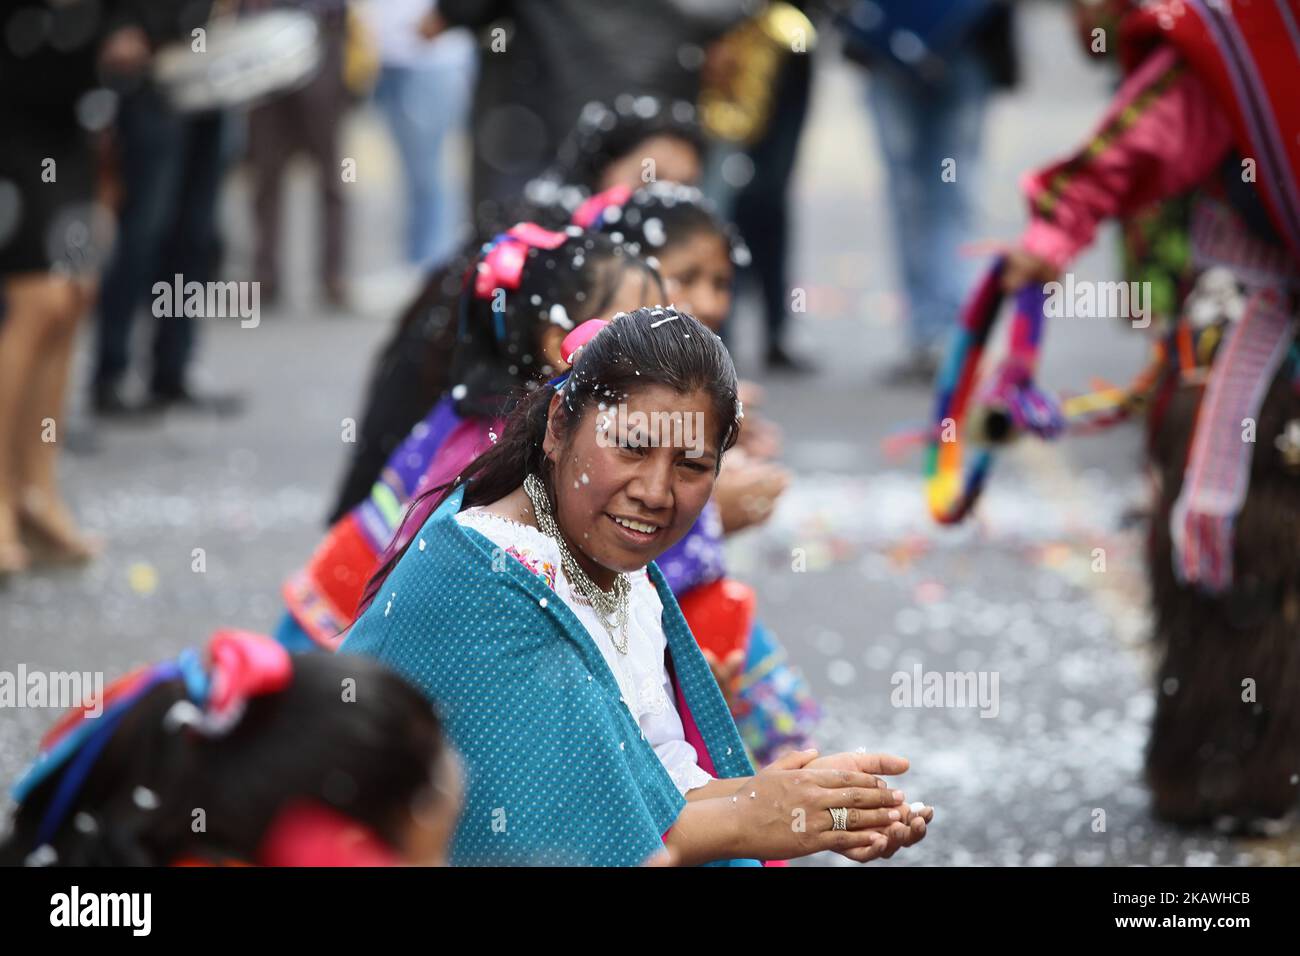 In Ecuador, the Carnival is not only celebrated with dancing, foam, water and parades. This traditional celebration has its religious tinge with the popular Mass of the 'Carnival Child'. The custom dictates that every year a prioste is chosen, who is the person in charge of offering the party in honor of the 'Divine child', which begins with a mass. In the Santa Rita neighborhood, in the south of Quito, this year the honor of giving the party fell on Daysi Tito. The young woman prepared a whole year to organize the celebration, which includes comparsas parading through the main streets of the  Stock Photo